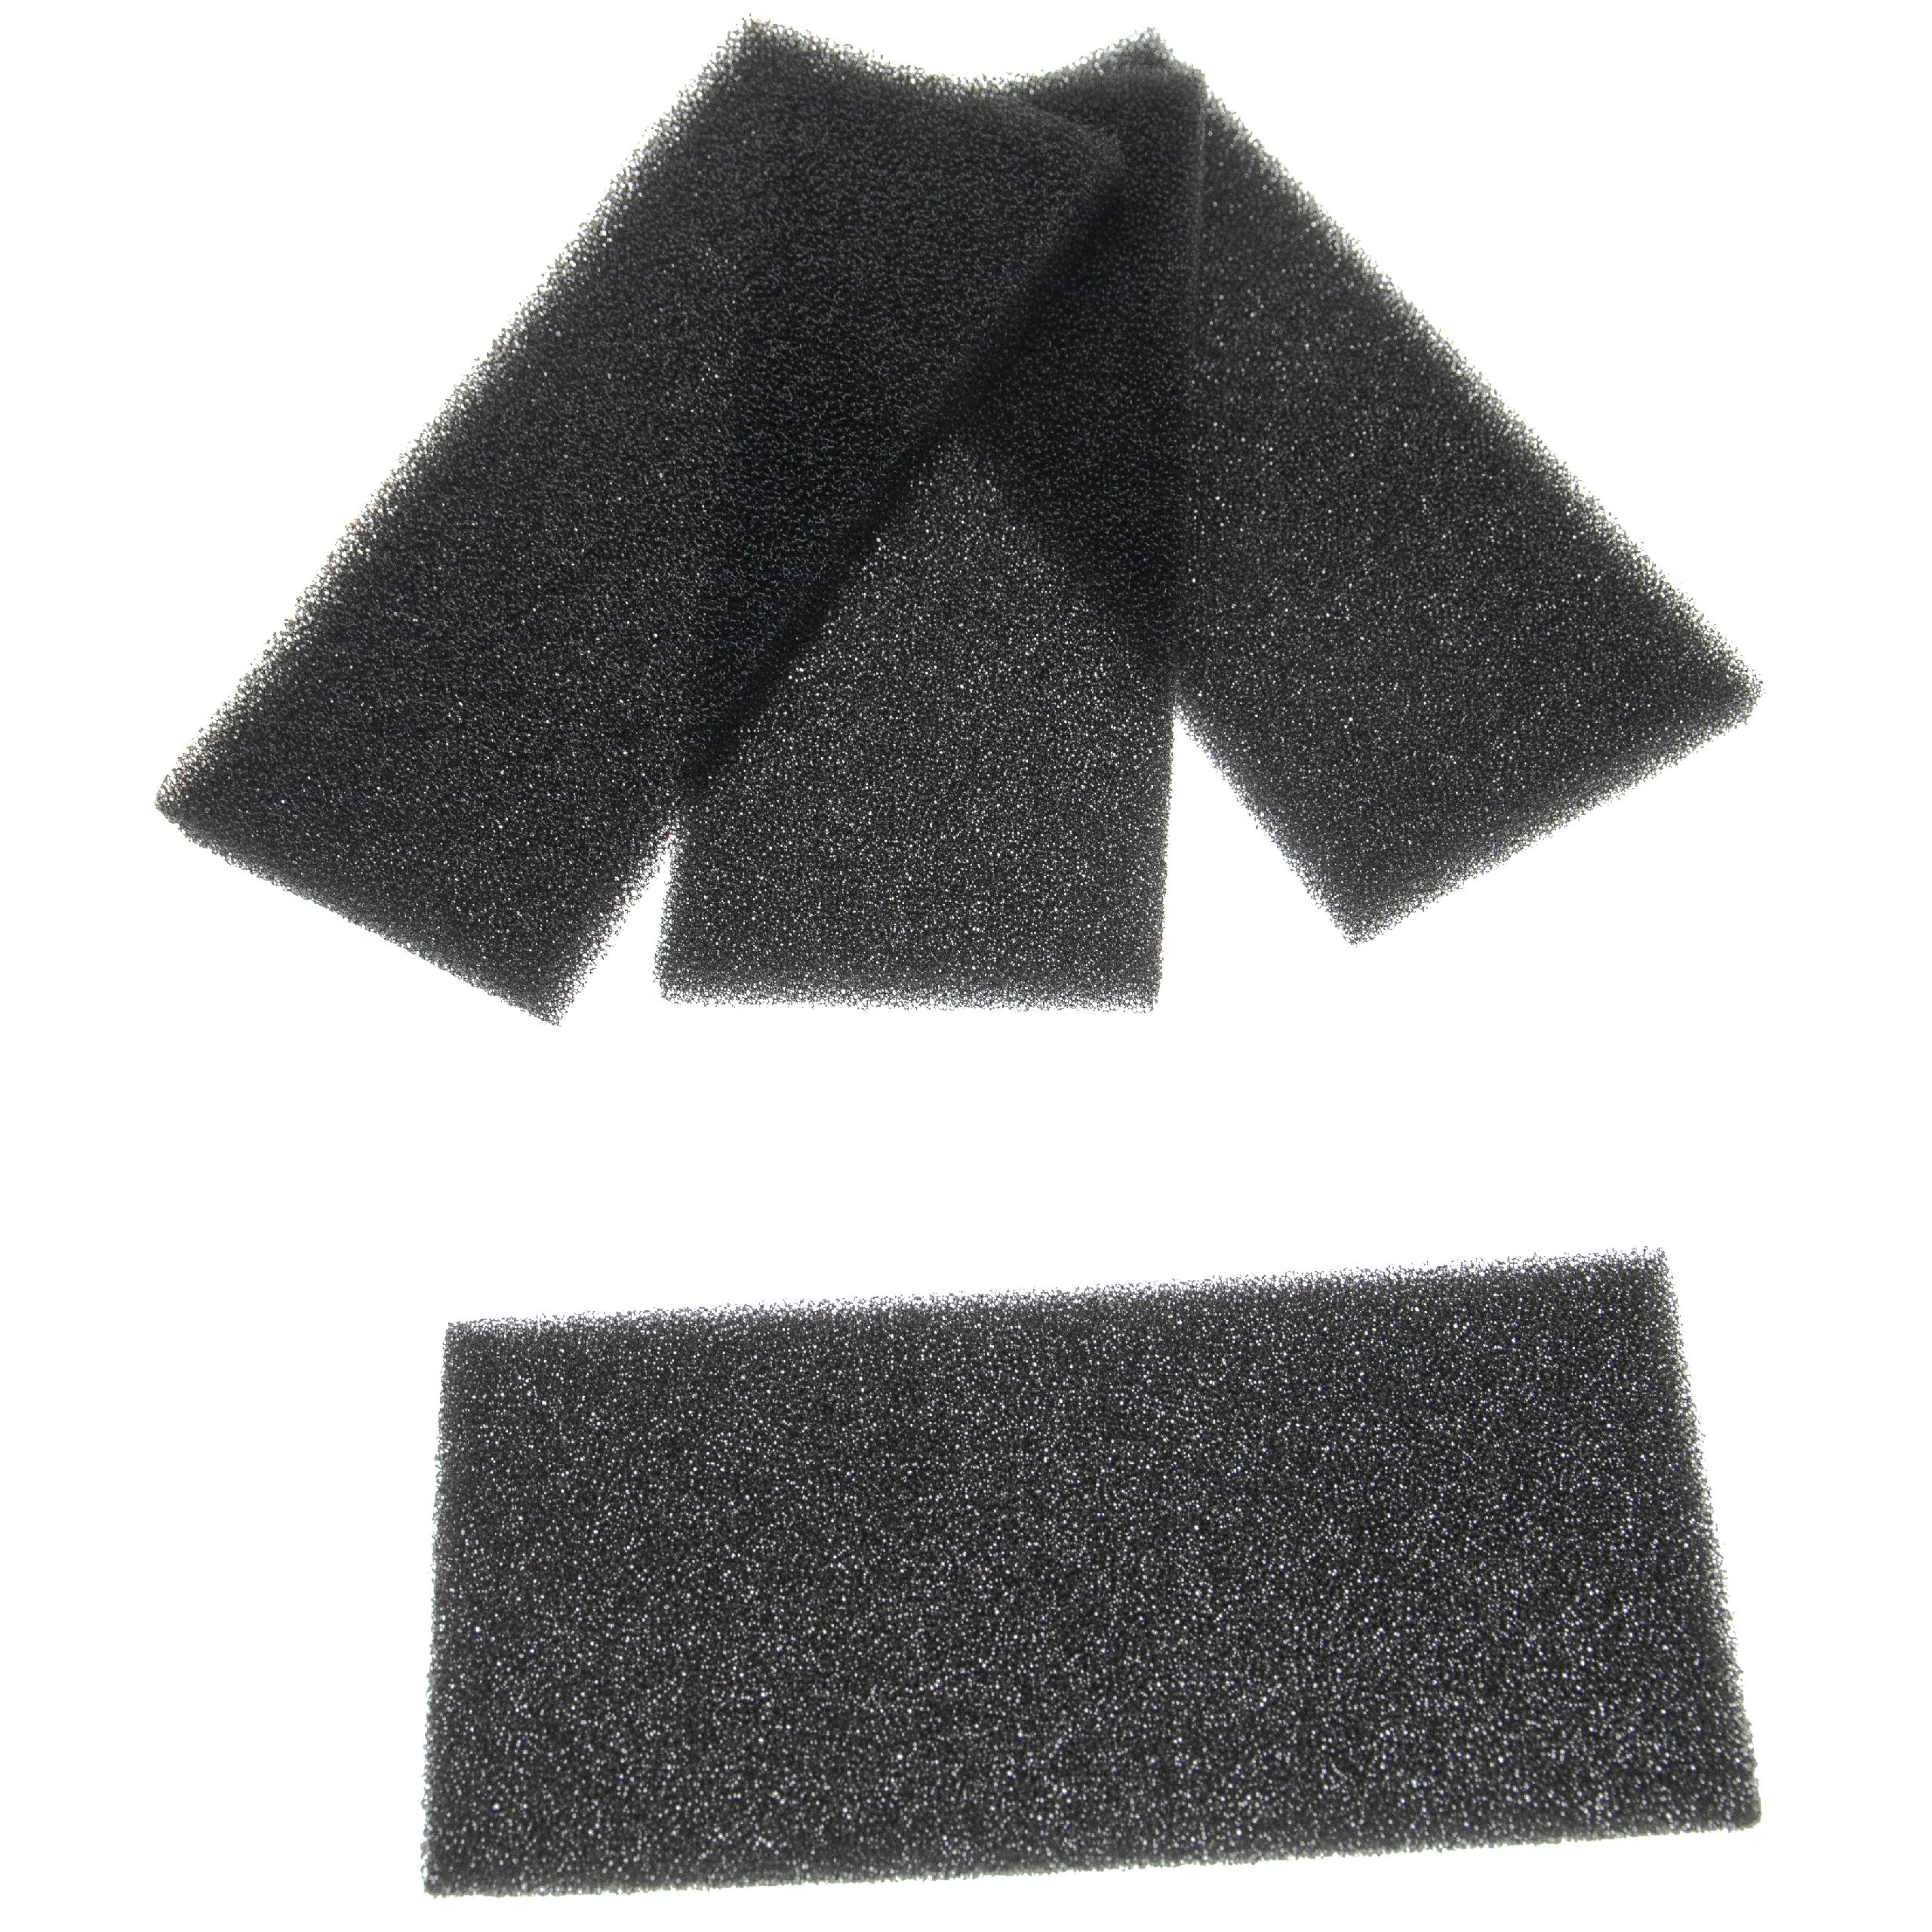 4x Filter G3 replaces Lunos 039998, 9/FEGO-3R, 039 998 for Lunos Air Ventilation Device - Coarse Dust Filters